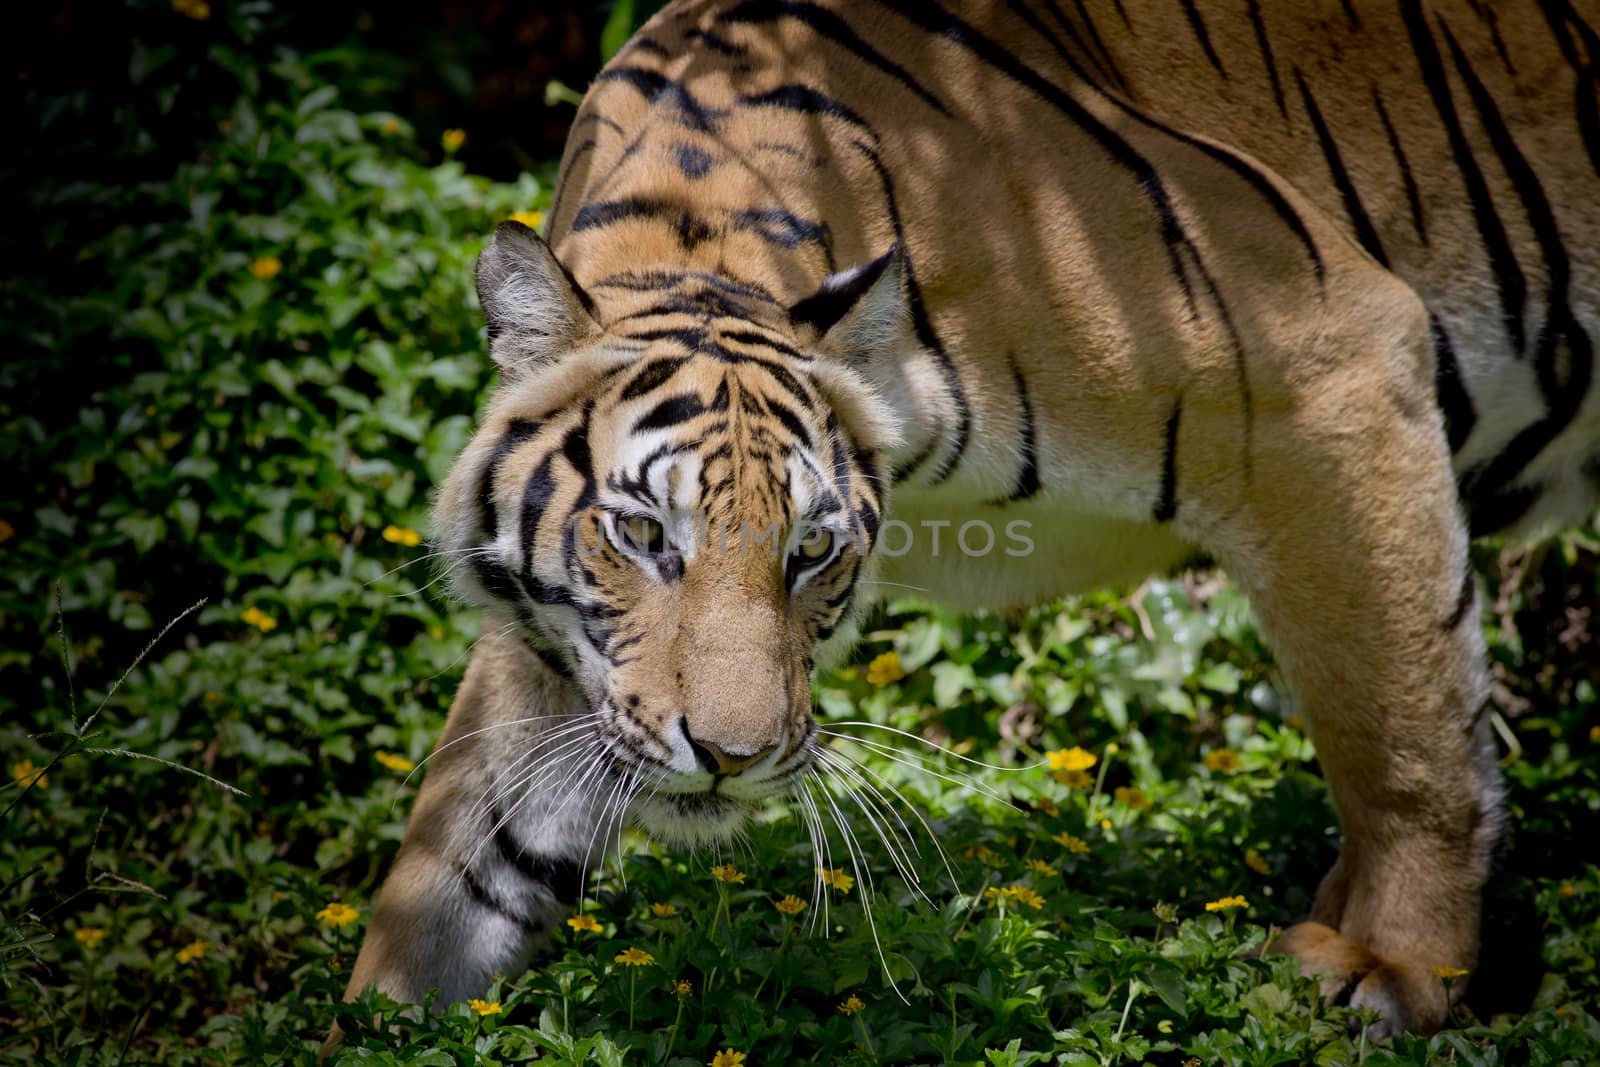 Black and White Tiger looking his prey and ready to catch it. by art9858